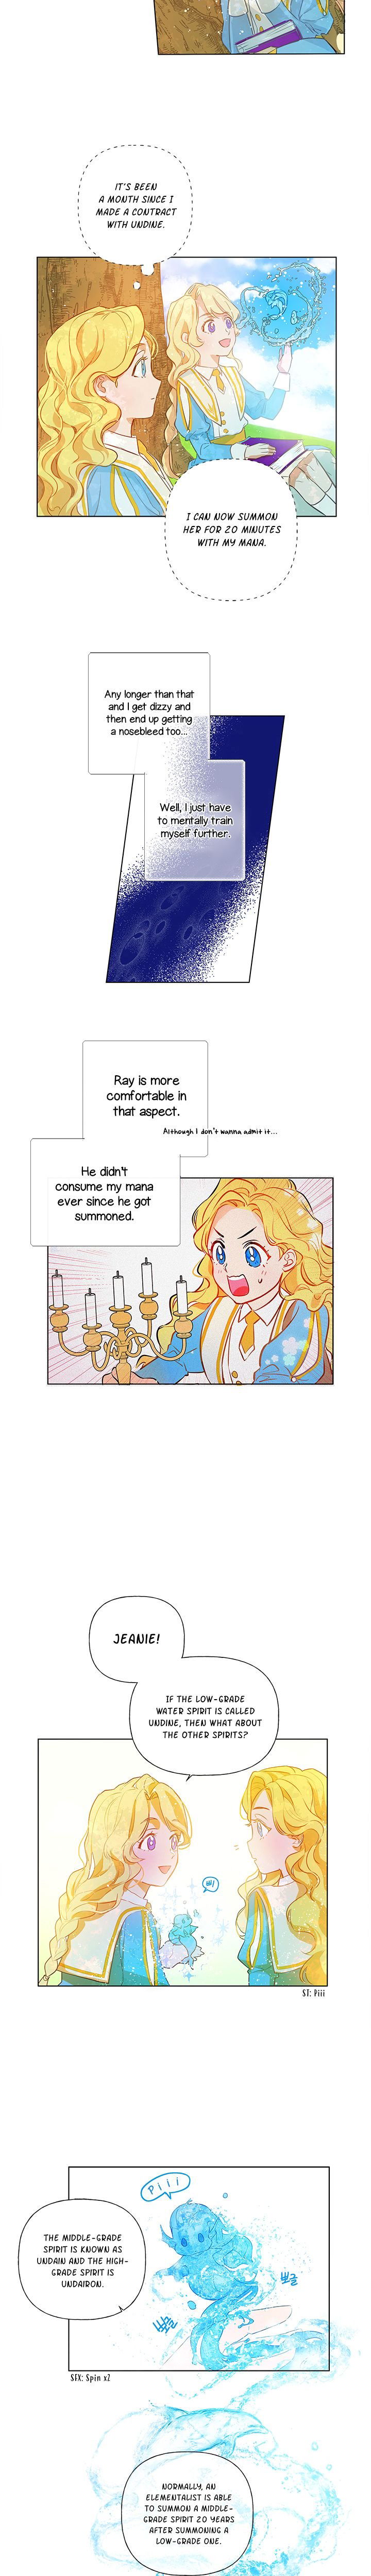 the-golden-haired-elementalist-chap-9-6